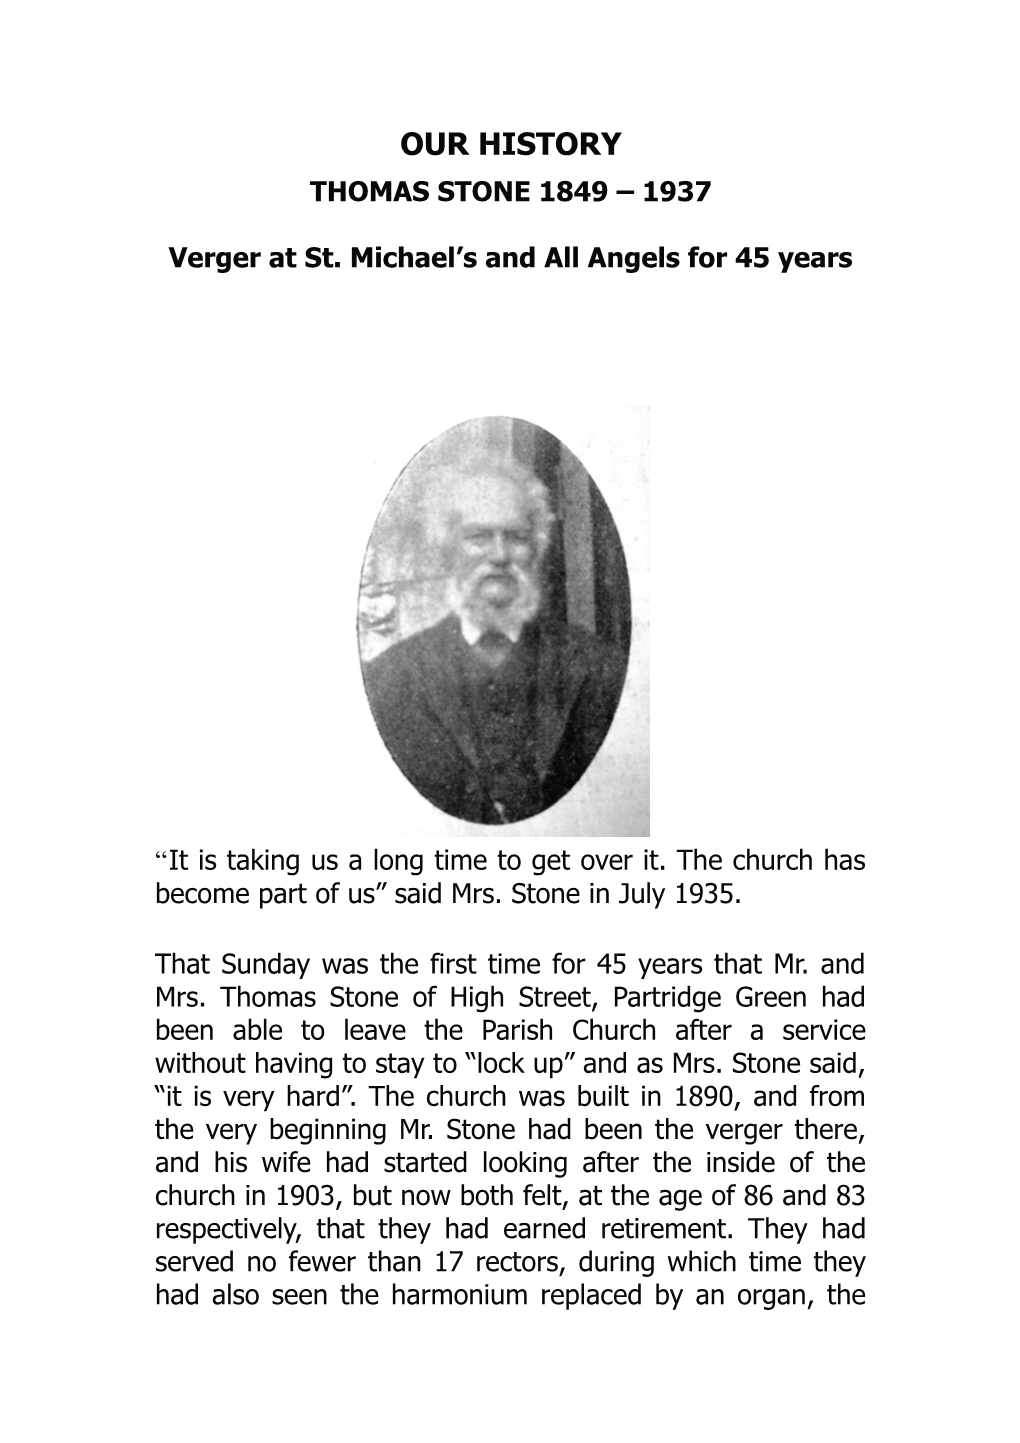 Verger at St. Michael S and All Angels for 45 Years